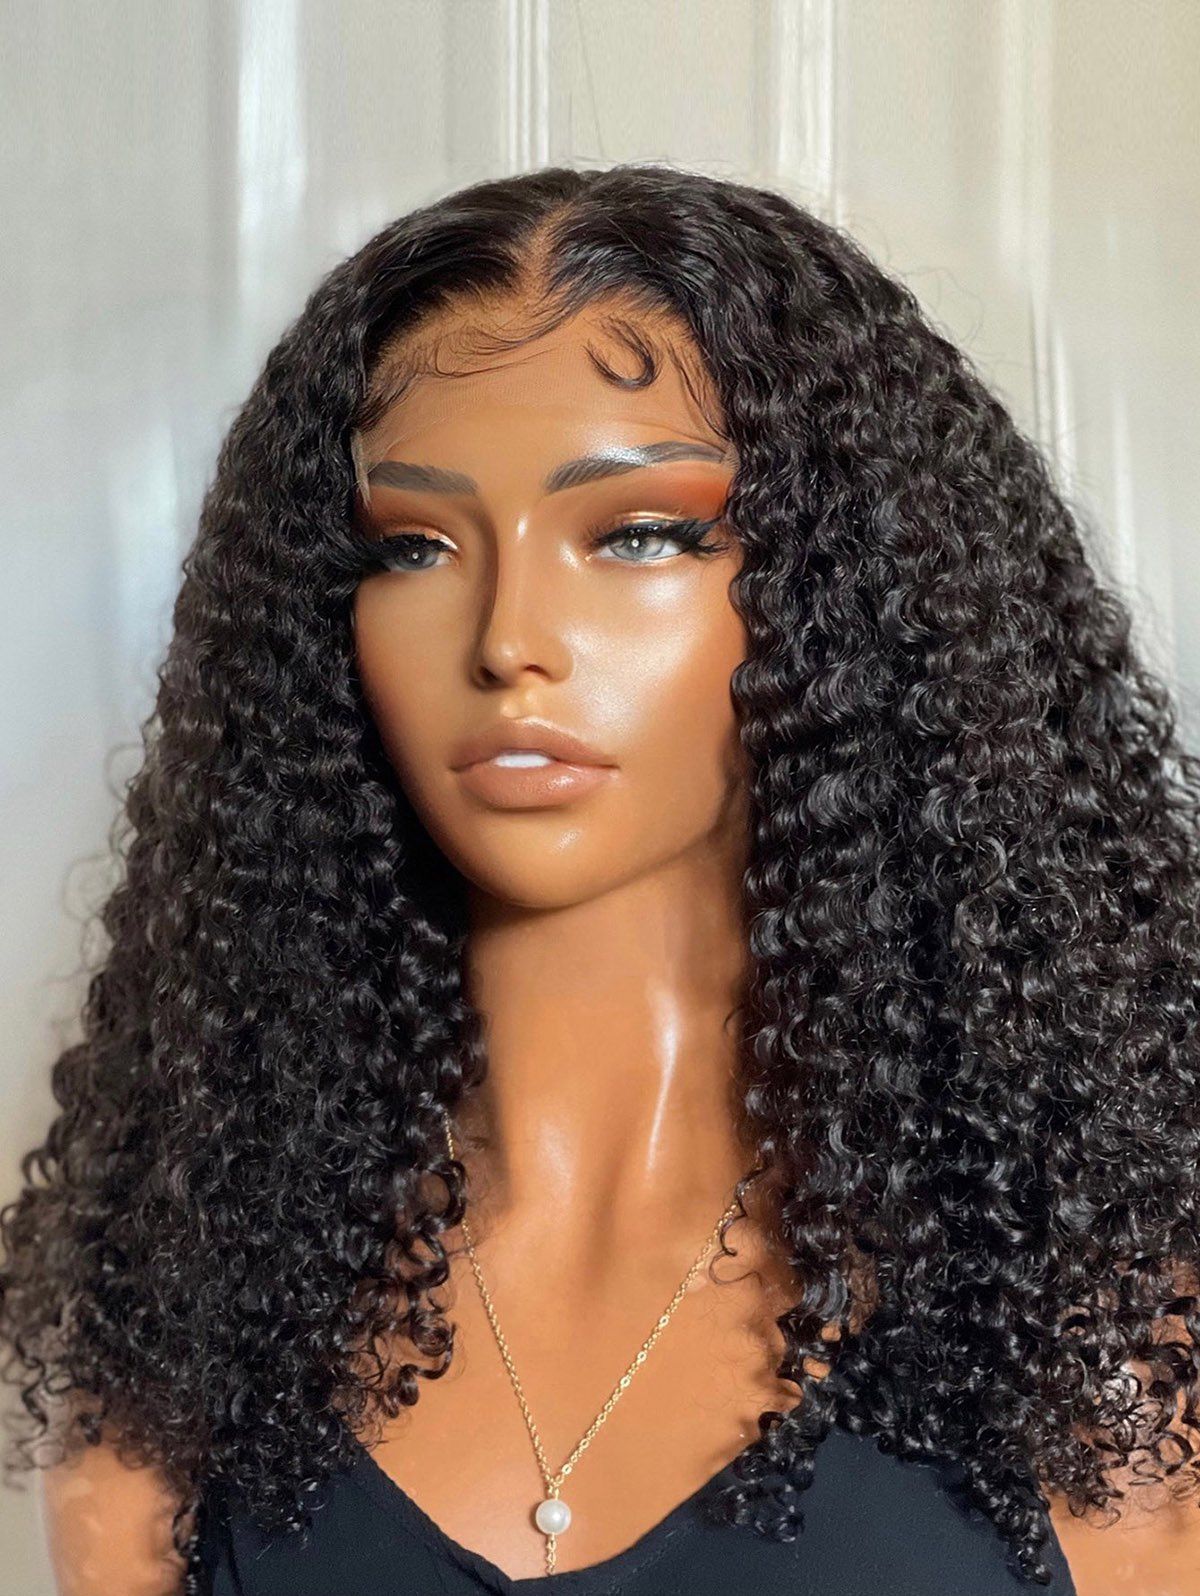 Fluffy Curly 180% Human Hair Wig 13*4 Lace Front Wig - BLACK 12INCH